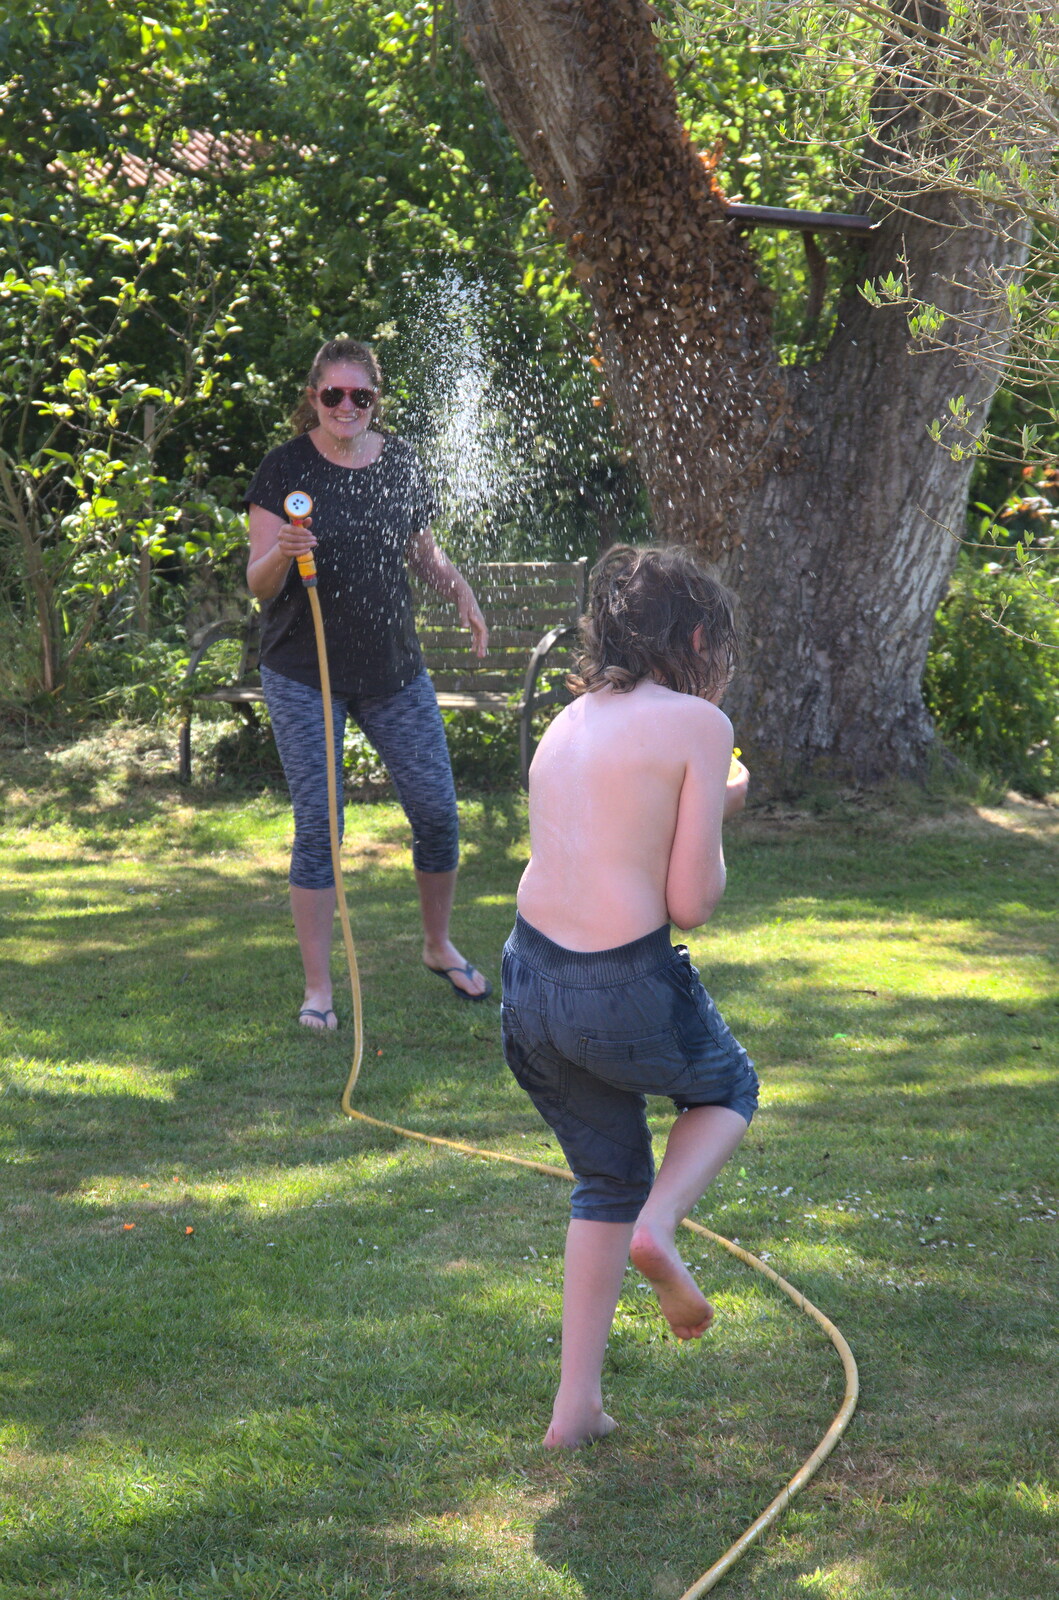 Hose action from More Lockdown Fun, Diss and Eye, Norfolk and Suffolk - 30th May 2020